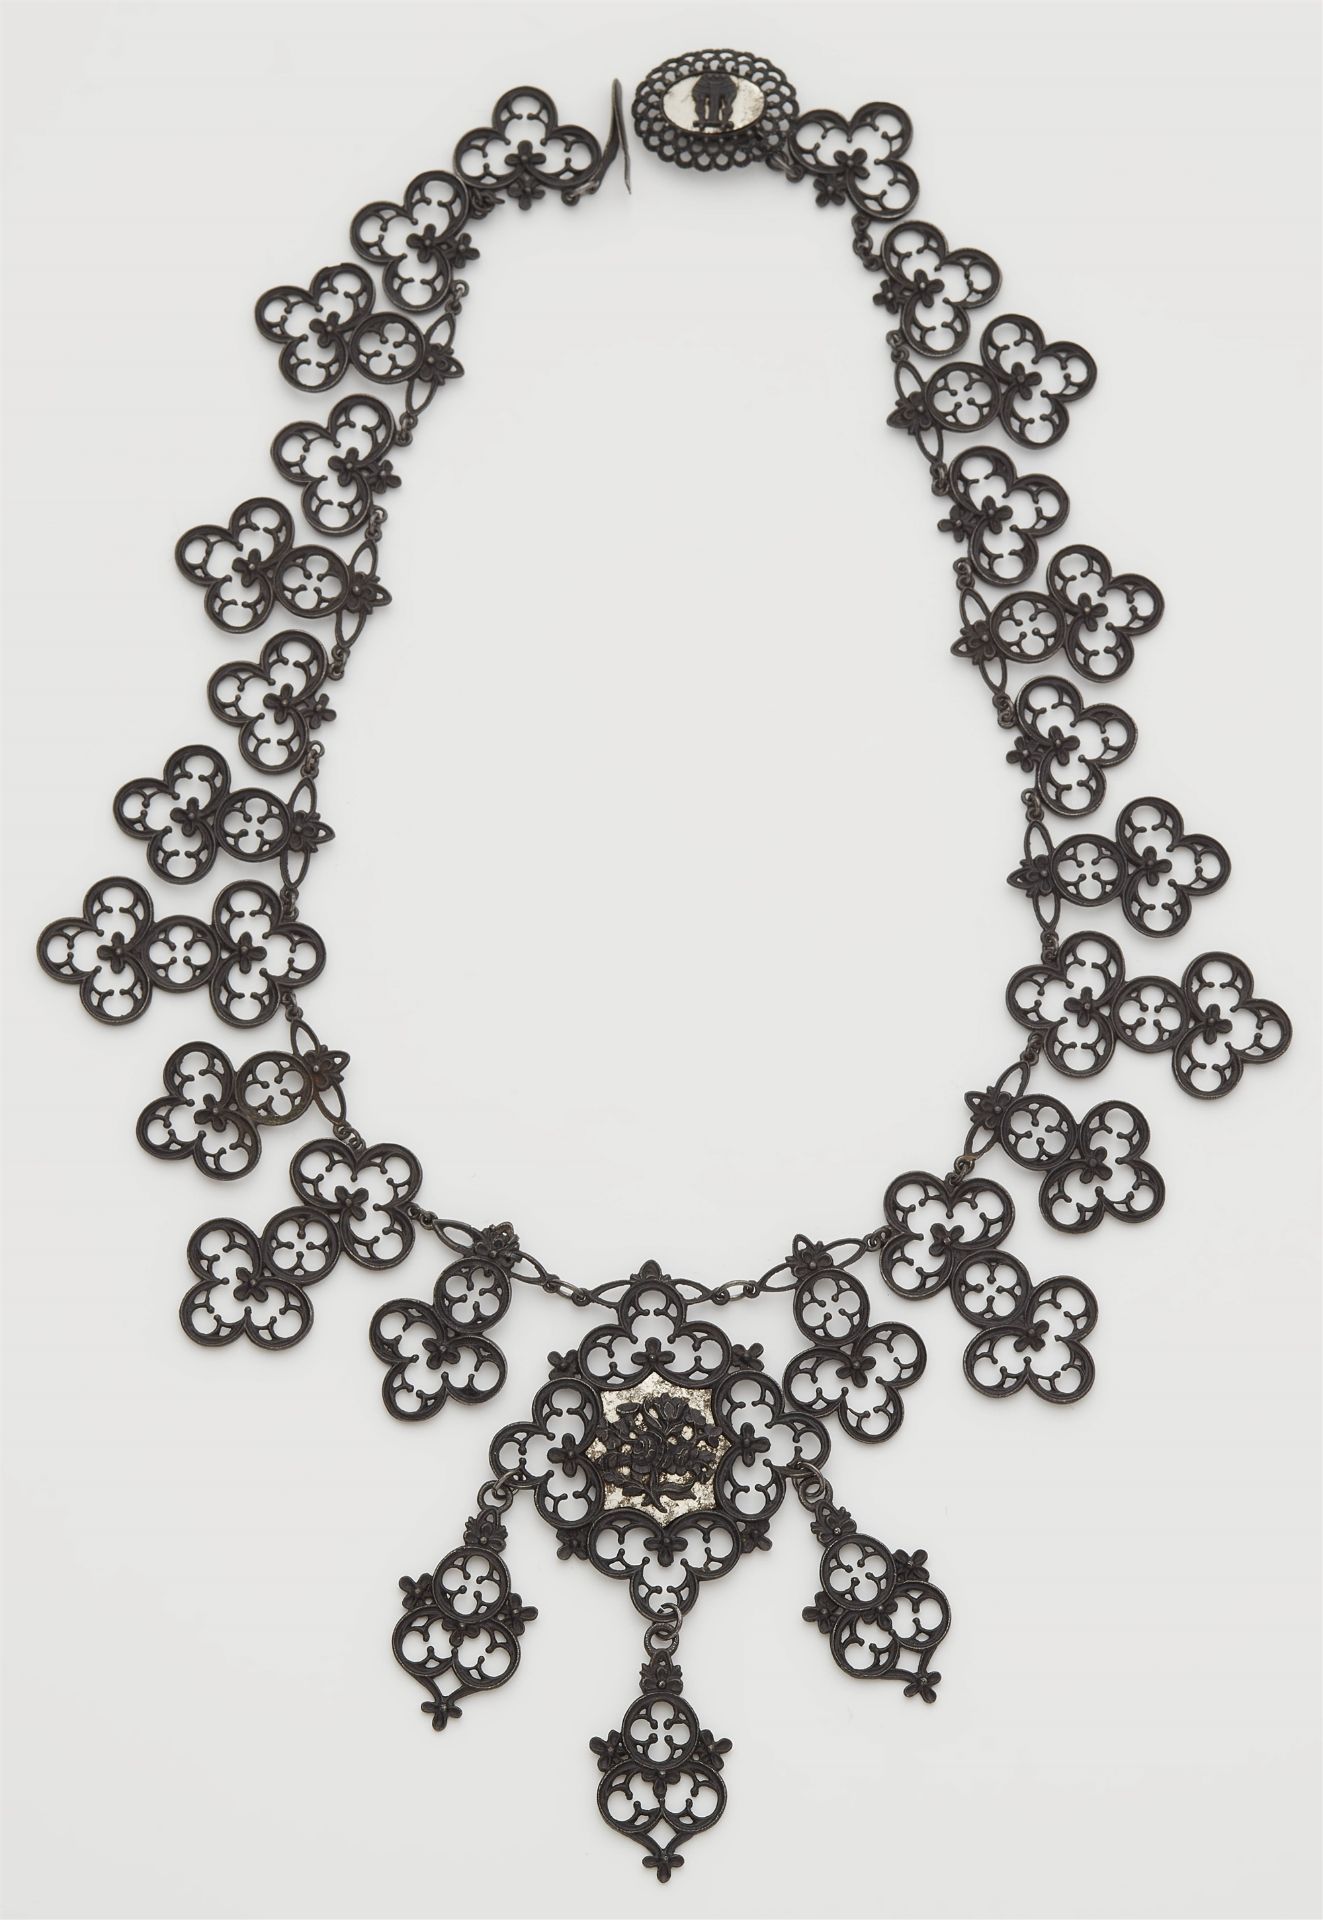 An early neo-gothic Berlin iron and steel necklace with large pendant in the style of Schinkel.